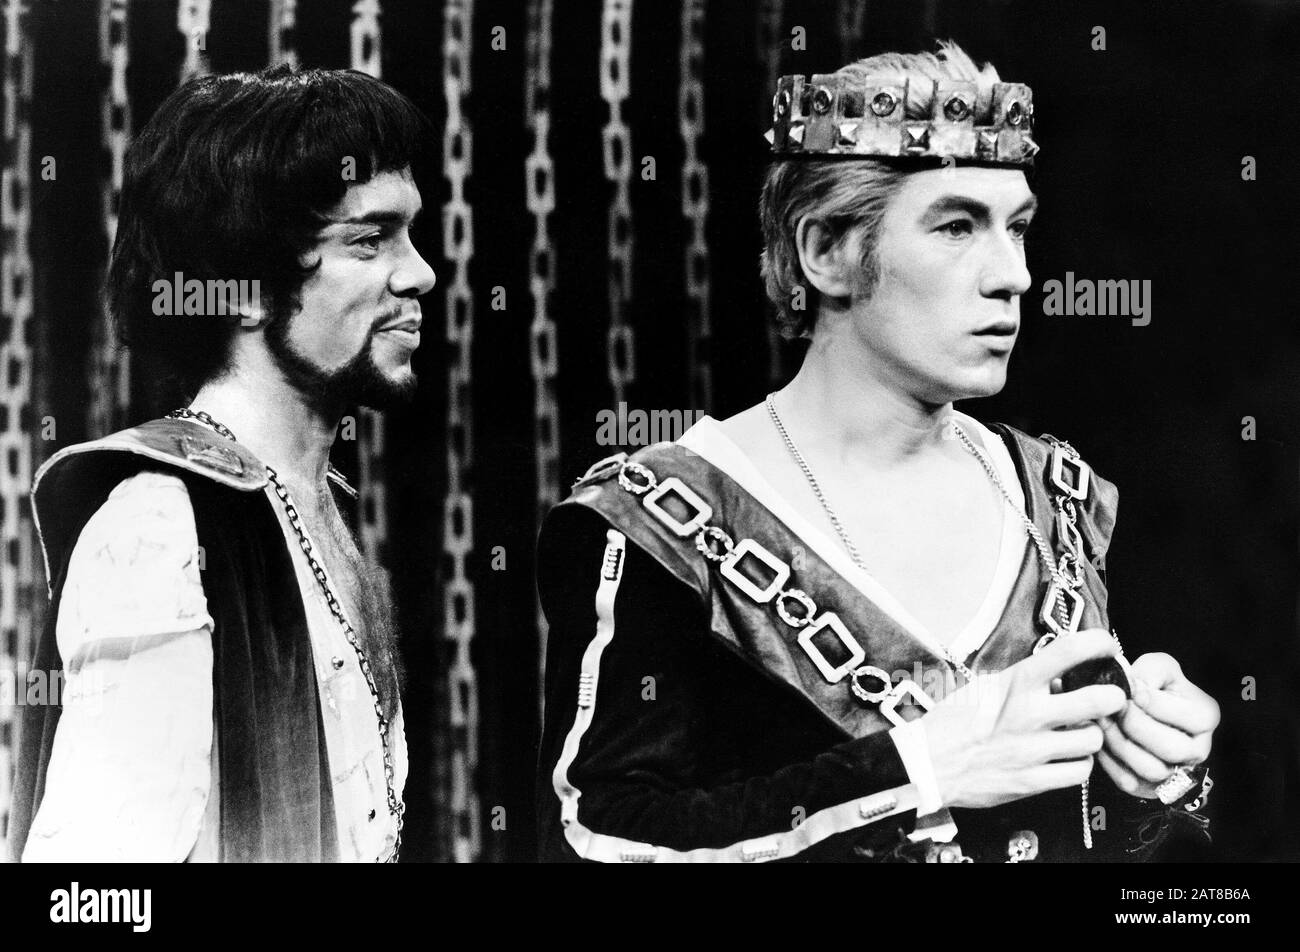 James Laurenson (Piers Gaveston), Ian McKellen (Edward II) in EDWARD II by Christopher Marlowe directed by Toby Robertson for the Prospect Theatre Company at the Piccadilly Theatre, London in 1970. Sir Ian Murray McKellen, born 1939, Burnley, England. English stage and film actor. Co-founder of Stonewall, gay rights activist, knighted in 1990, made a Companion of Honour 2007. Stock Photo